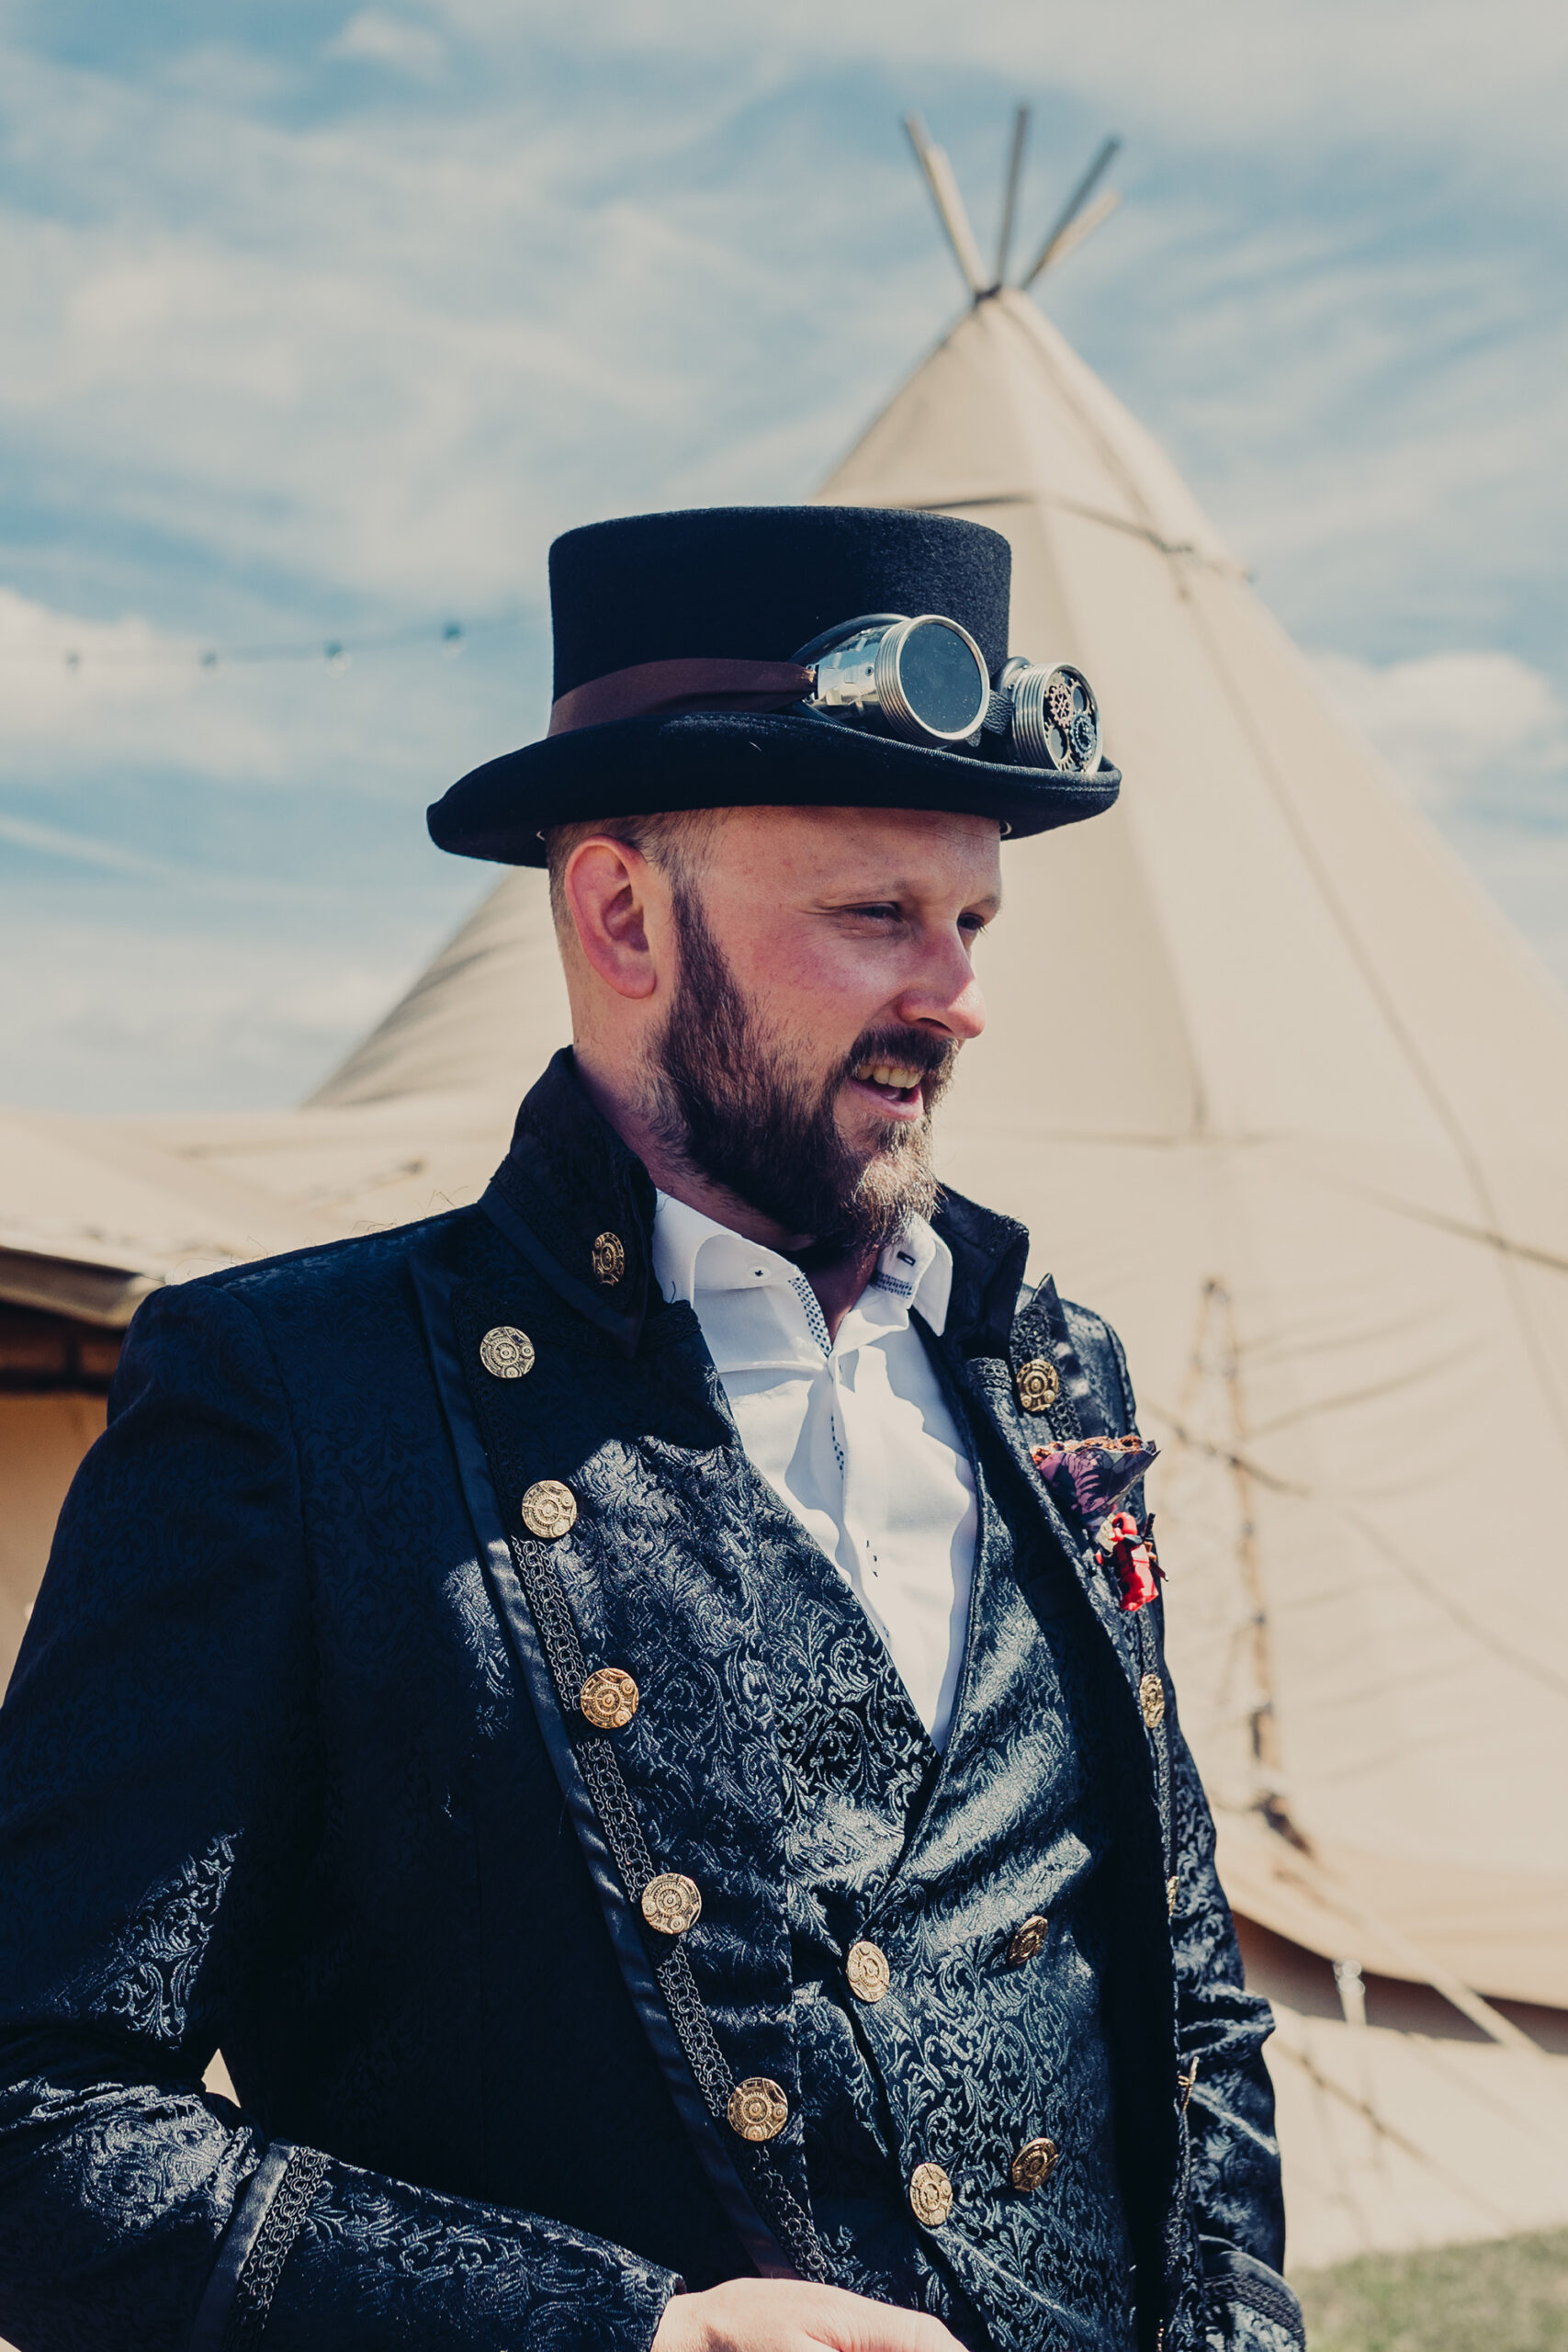 April Rien Steampunk Festival Wedding Chelsea Shoesmith Photography SBS 010 scaled